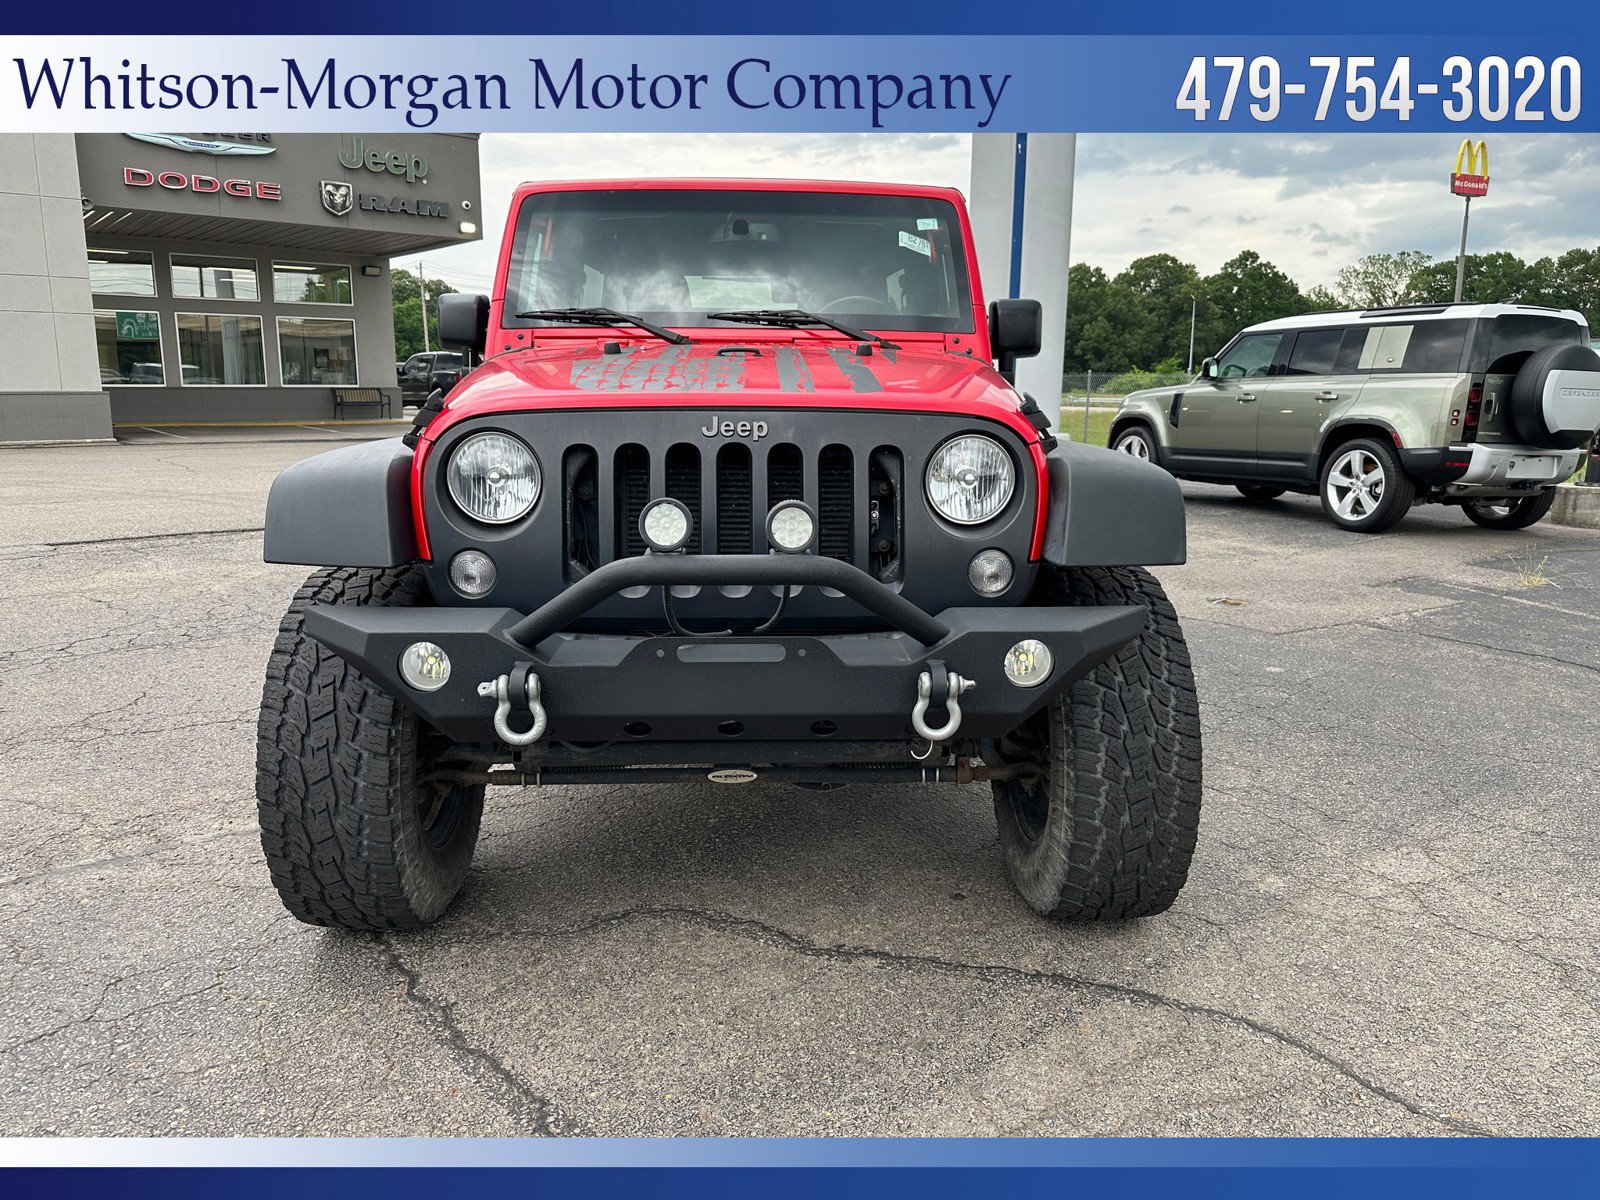 Used 2016 Jeep Wrangler Unlimited Black Bear with VIN 1C4BJWDG3GL121792 for sale in St. Cloud, Minnesota